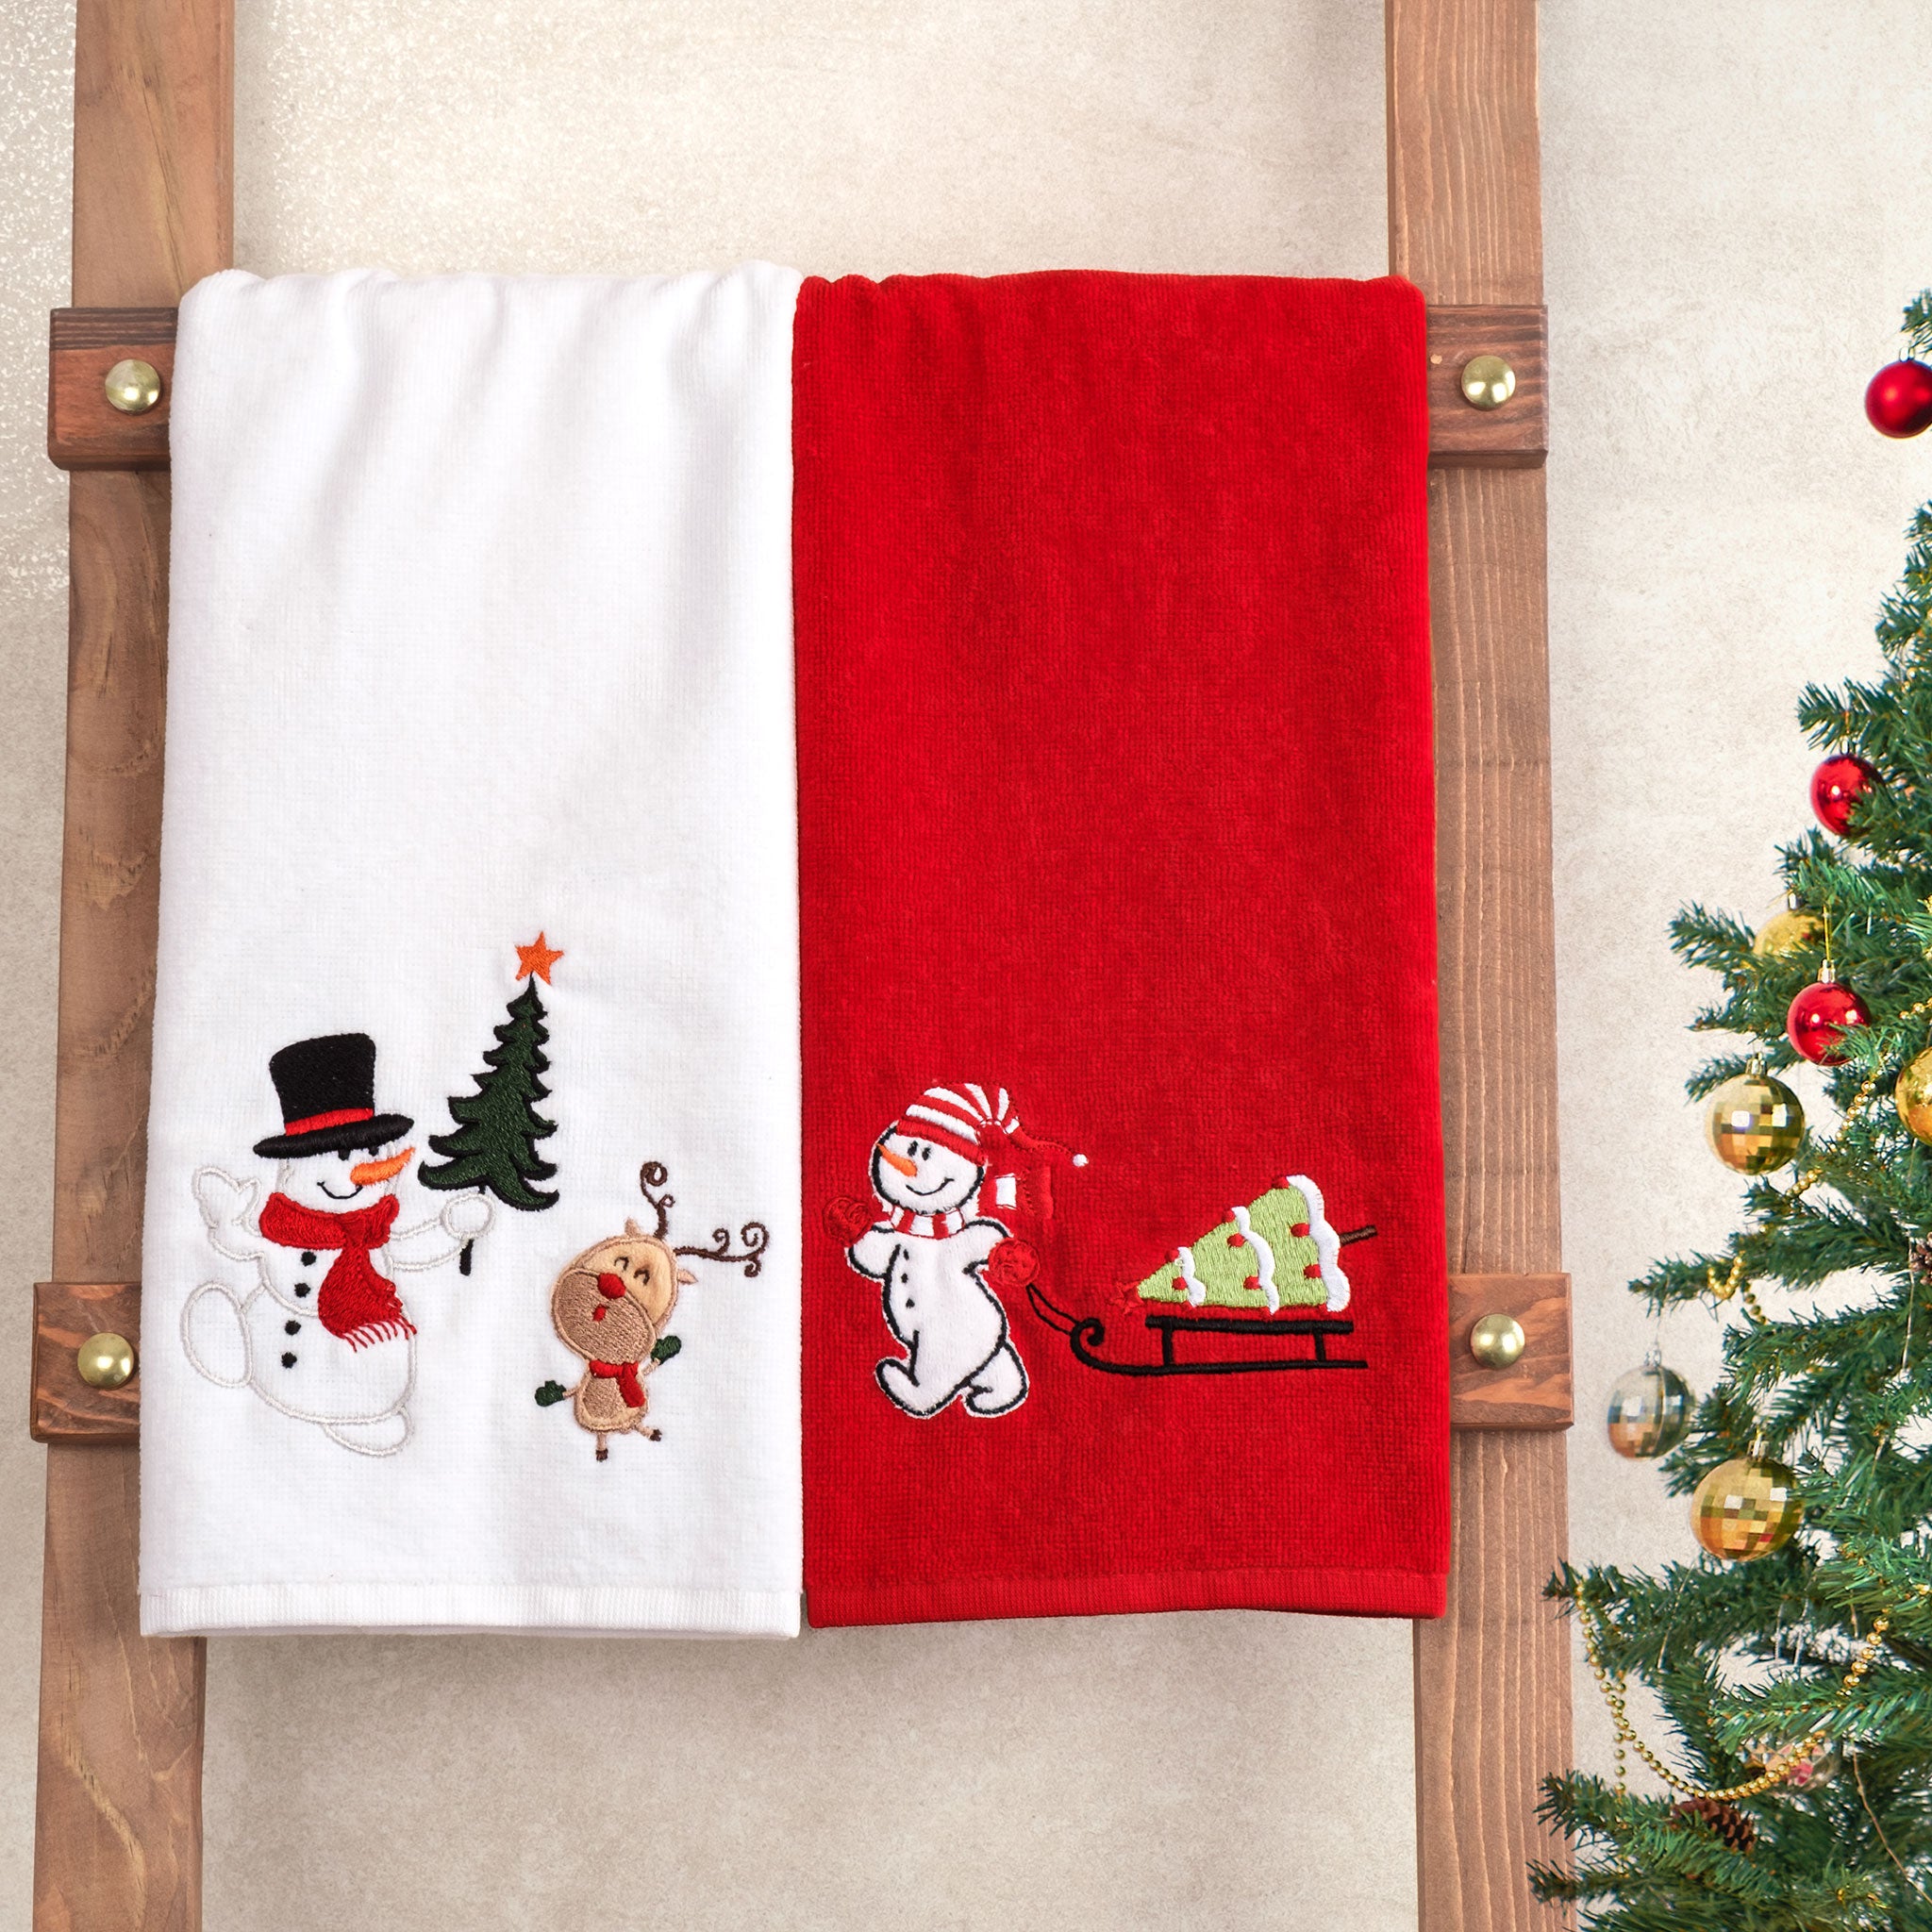 American Soft Linen - Christmas Towels 2  Packed Embroidered Towels for Decor Xmas - 60 Set Case Pack - Snowmen - 2